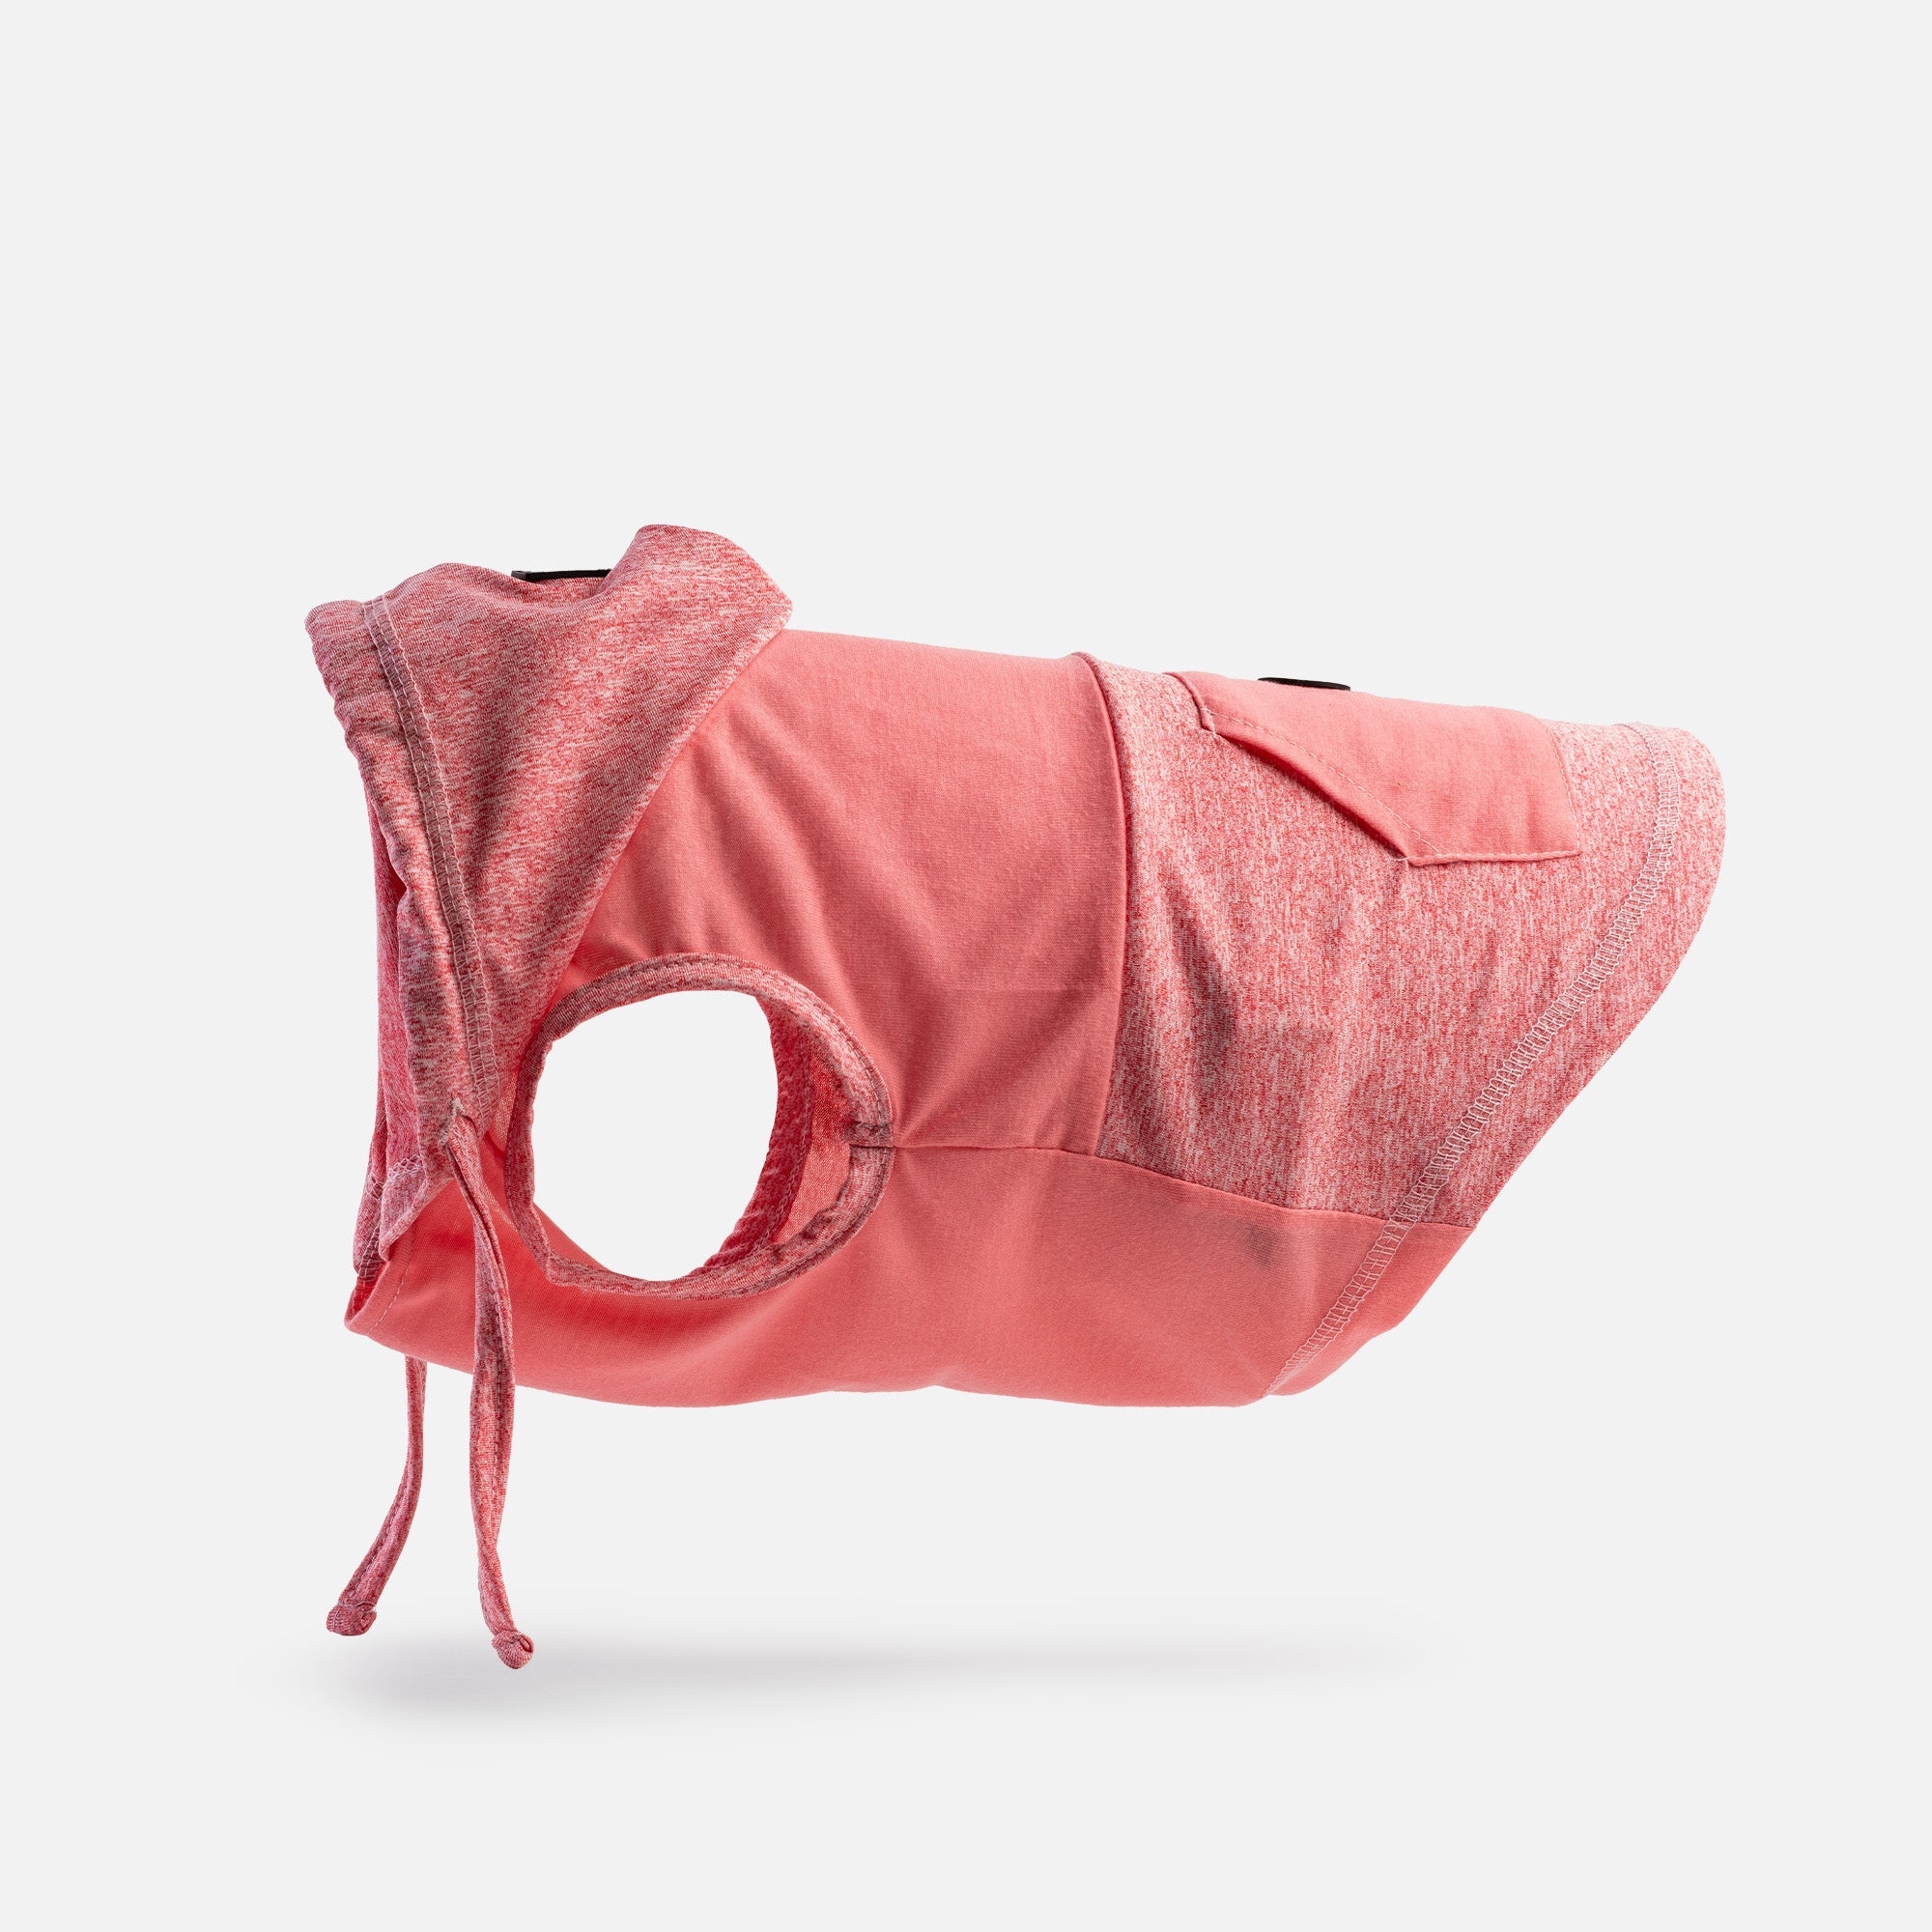 Fashionable pink dog hoodie for pets